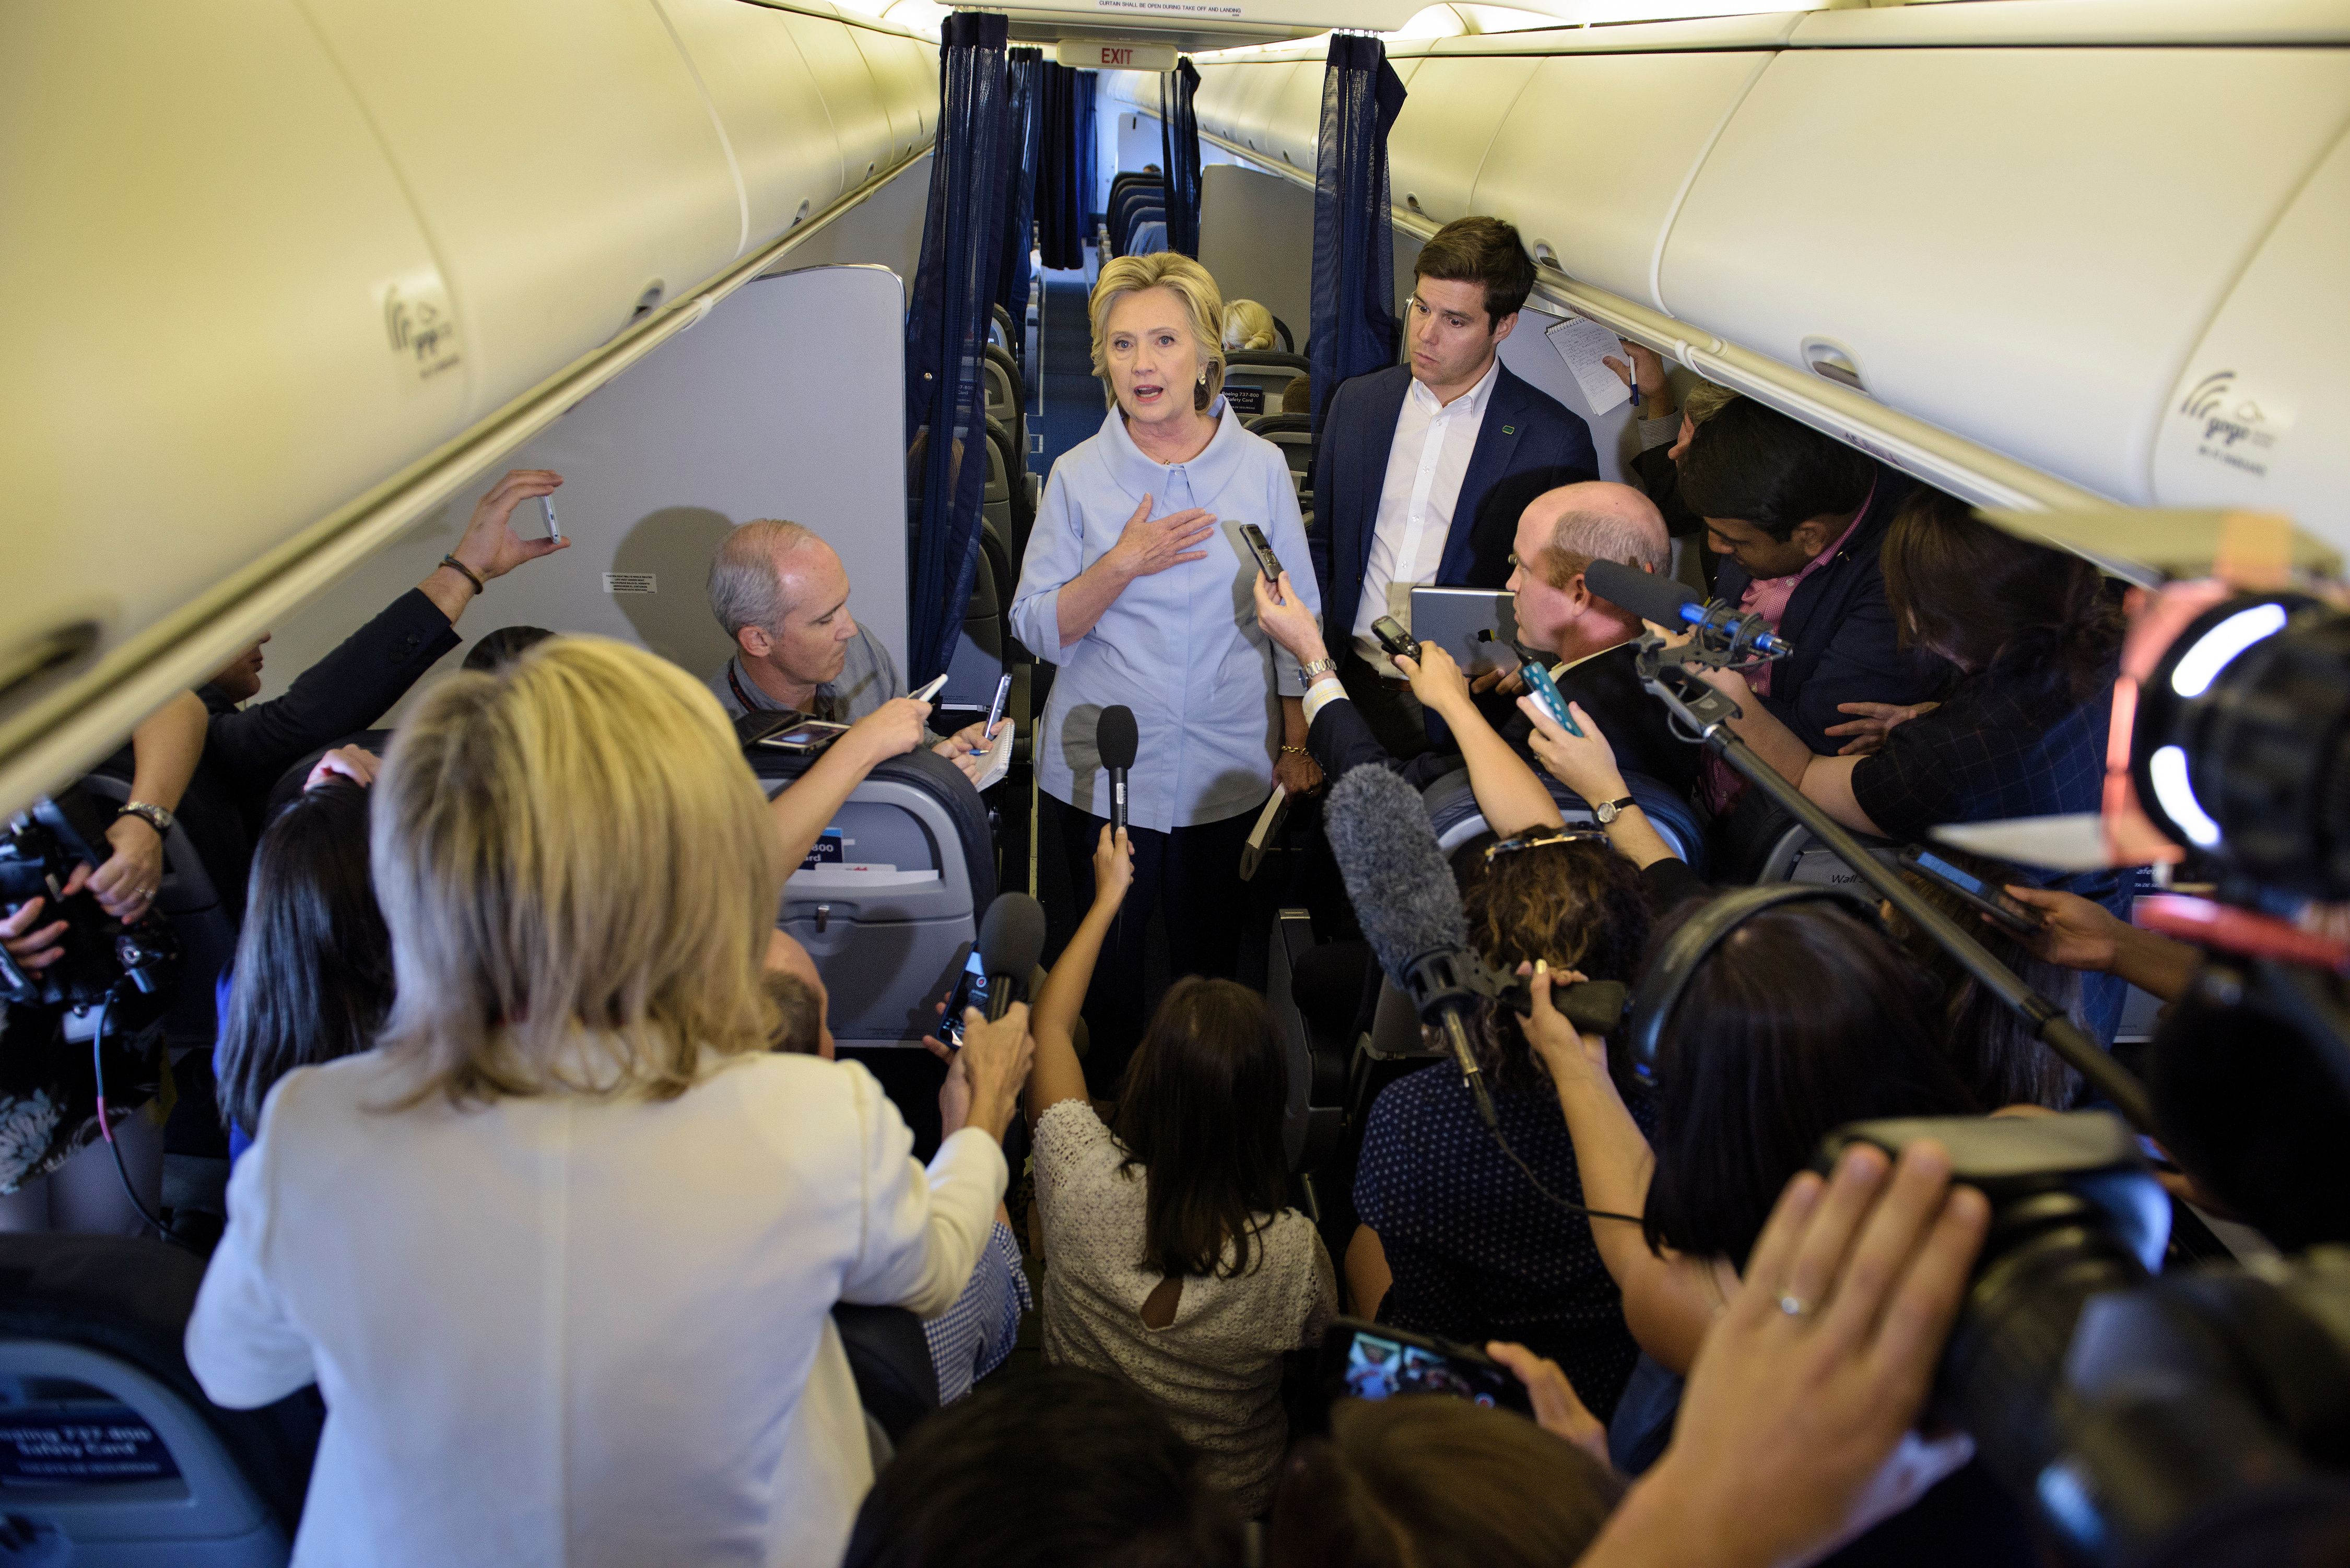 Democratic presidential nominee Hillary Clinton speaks to the press onboard her plane September 5, 2016.